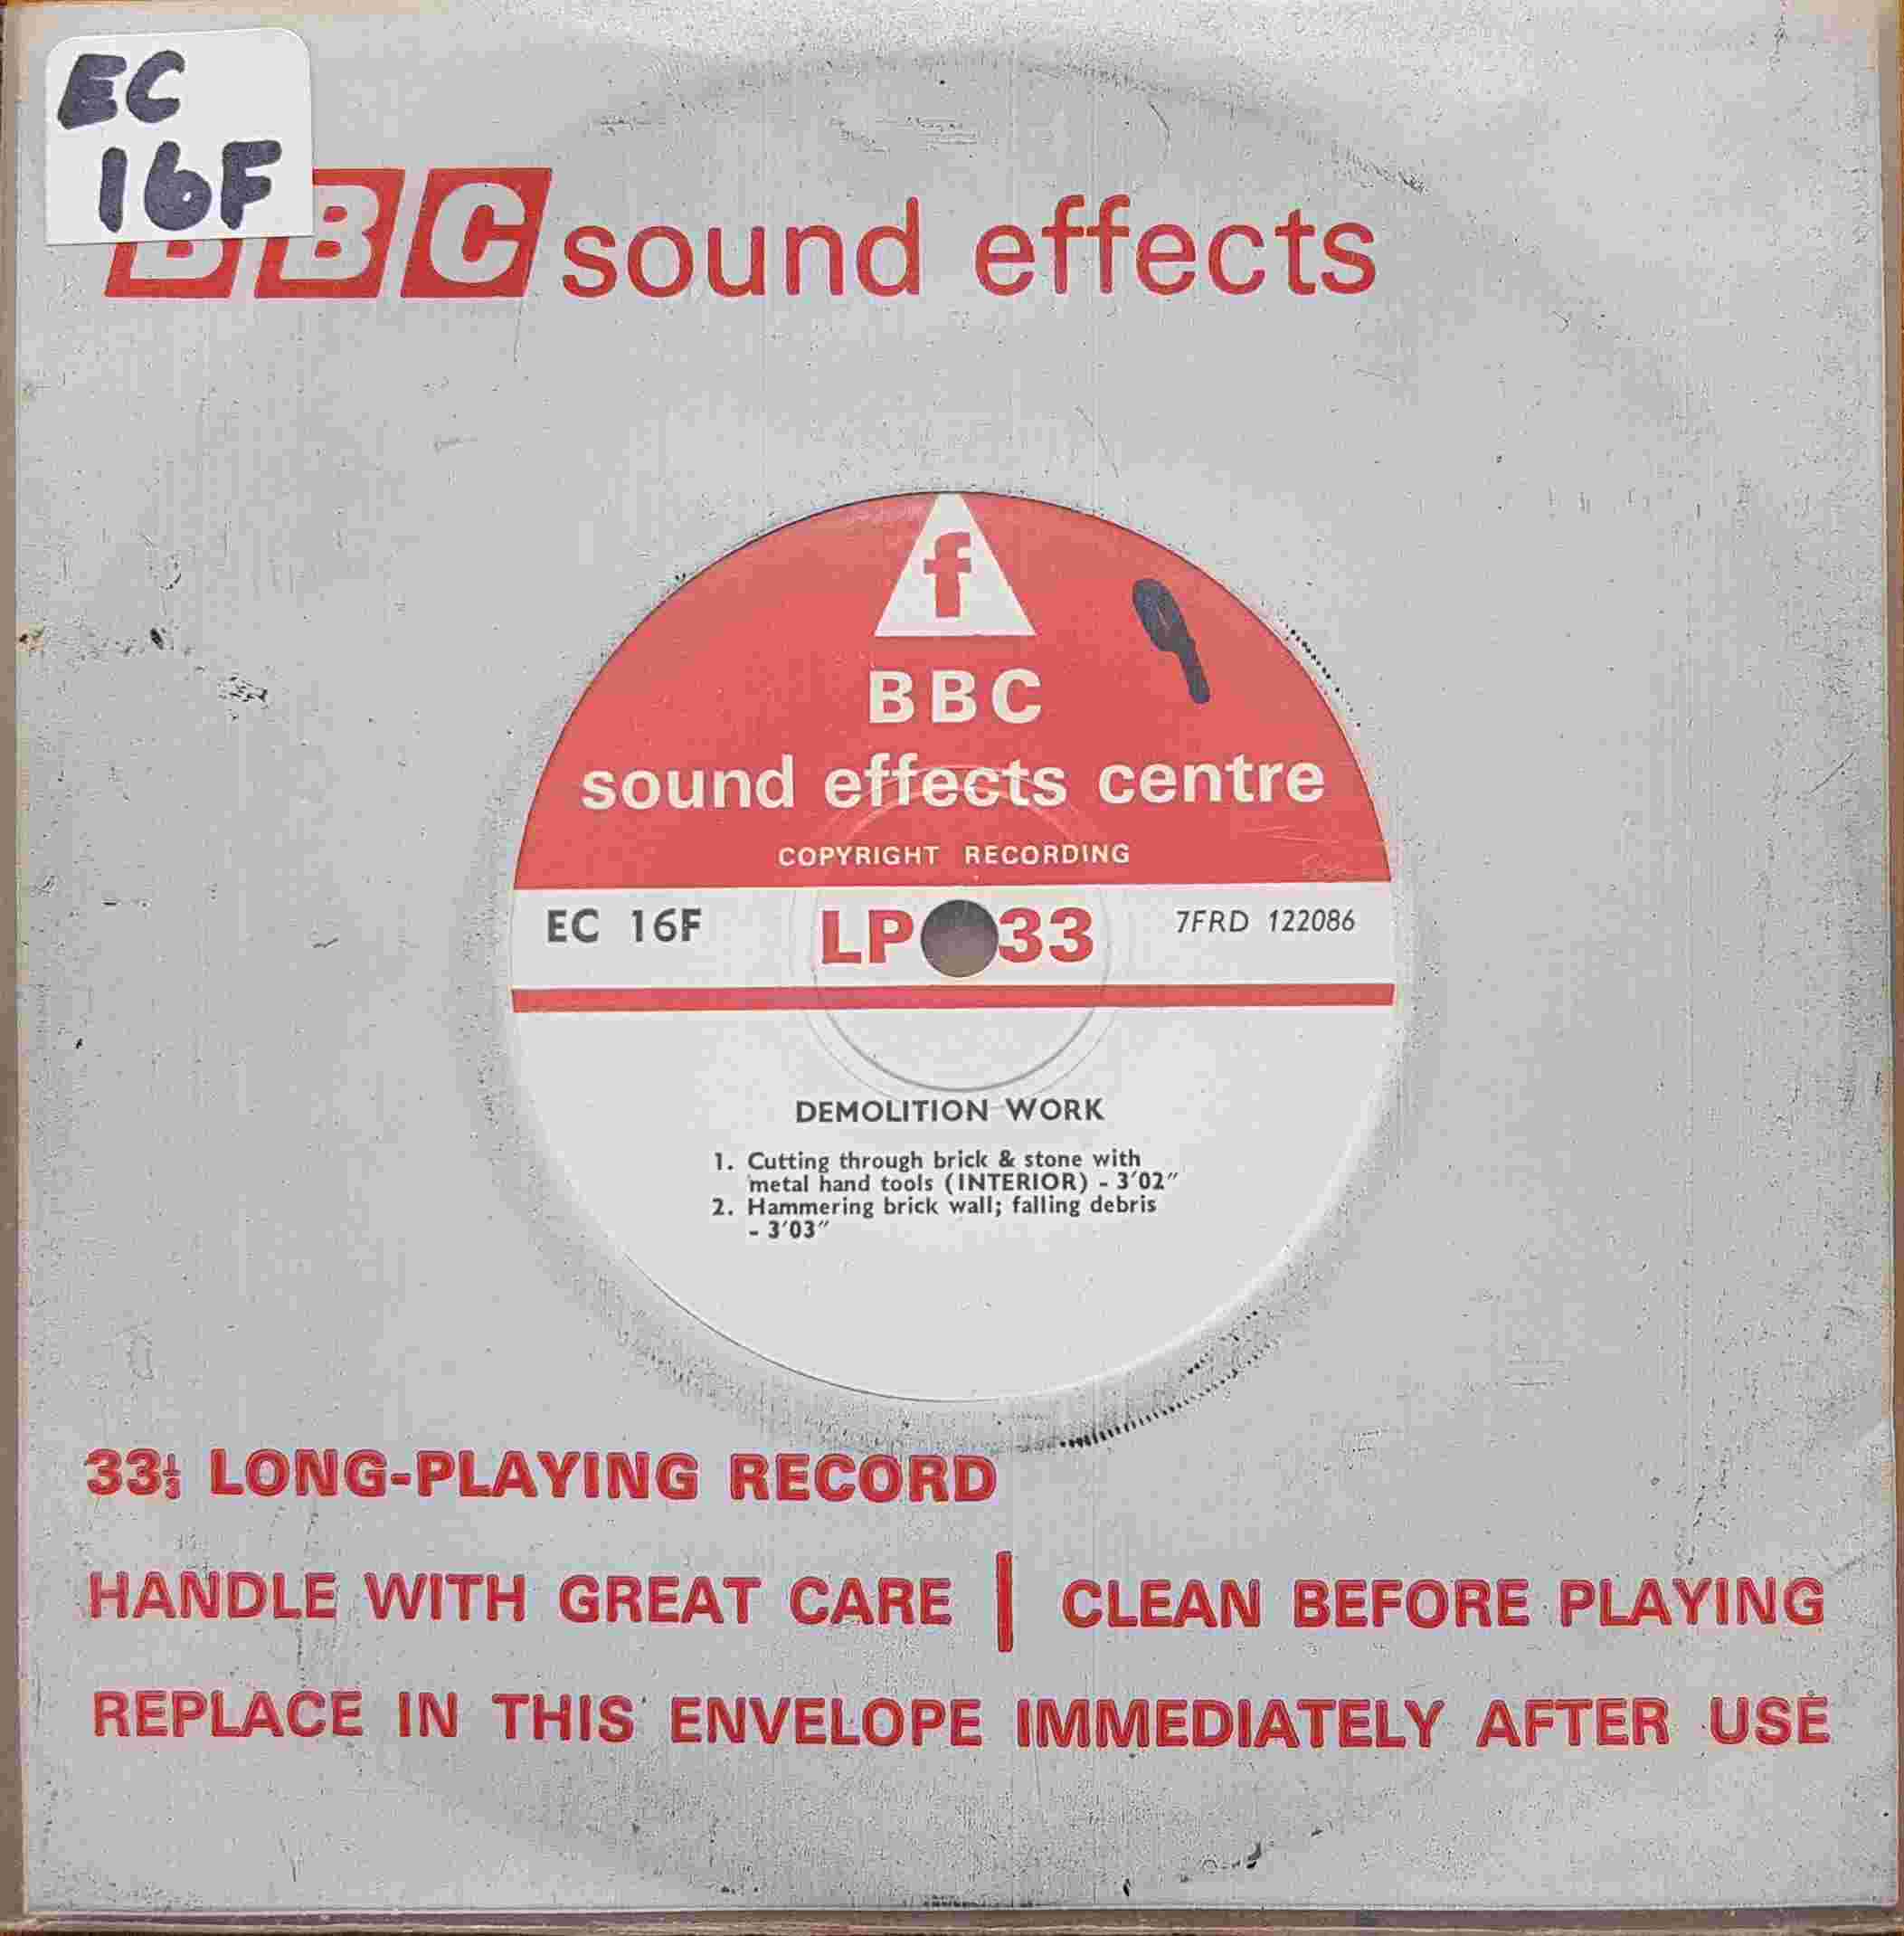 Picture of EC 16F Demolition work by artist Not registered from the BBC singles - Records and Tapes library